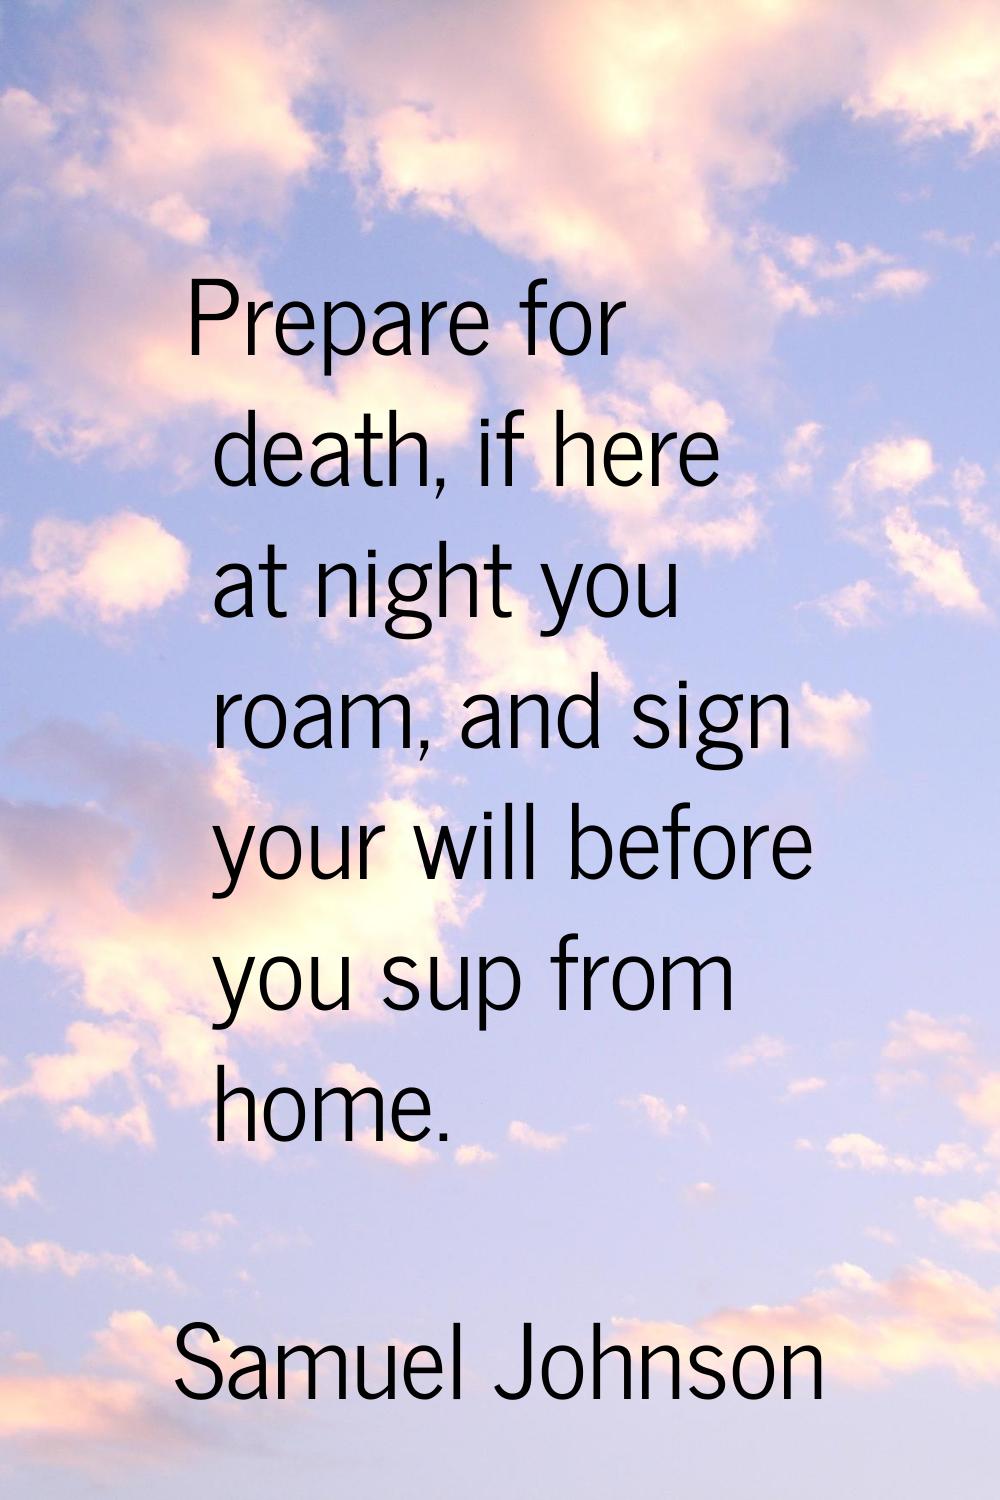 Prepare for death, if here at night you roam, and sign your will before you sup from home.